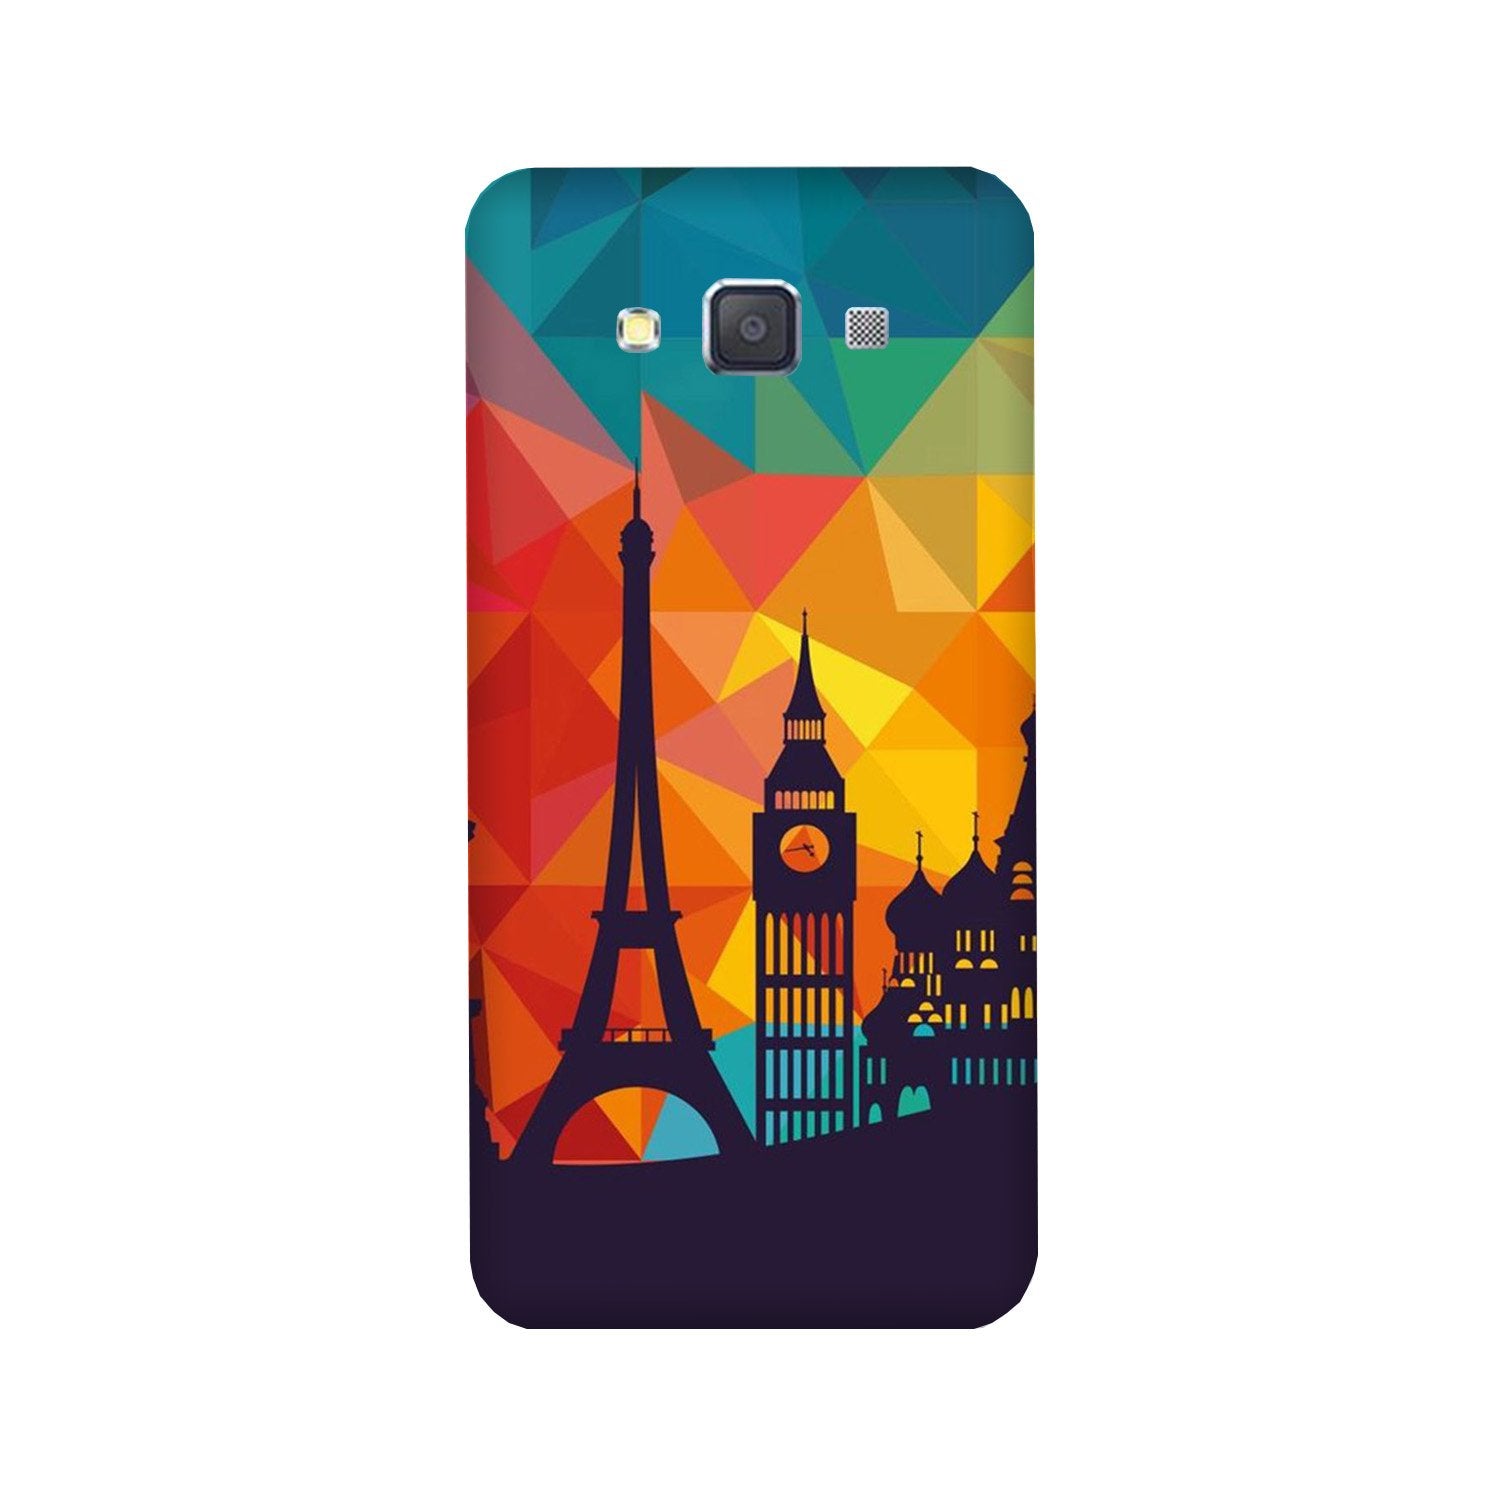 Eiffel Tower2 Case for Galaxy ON5/ON5 Pro